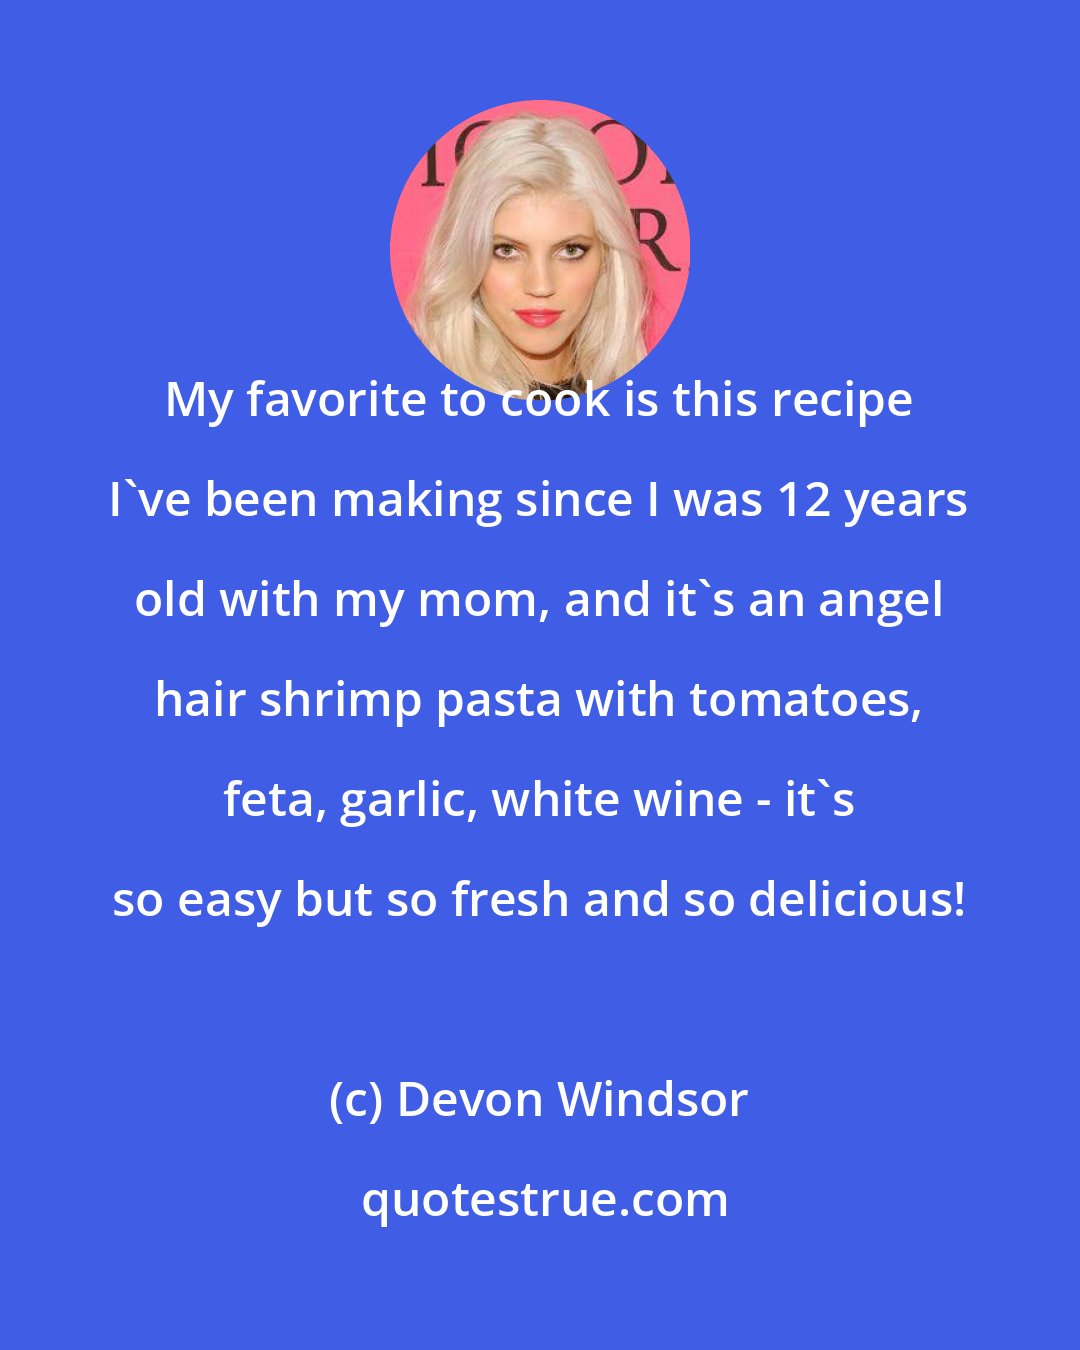 Devon Windsor: My favorite to cook is this recipe I've been making since I was 12 years old with my mom, and it's an angel hair shrimp pasta with tomatoes, feta, garlic, white wine - it's so easy but so fresh and so delicious!